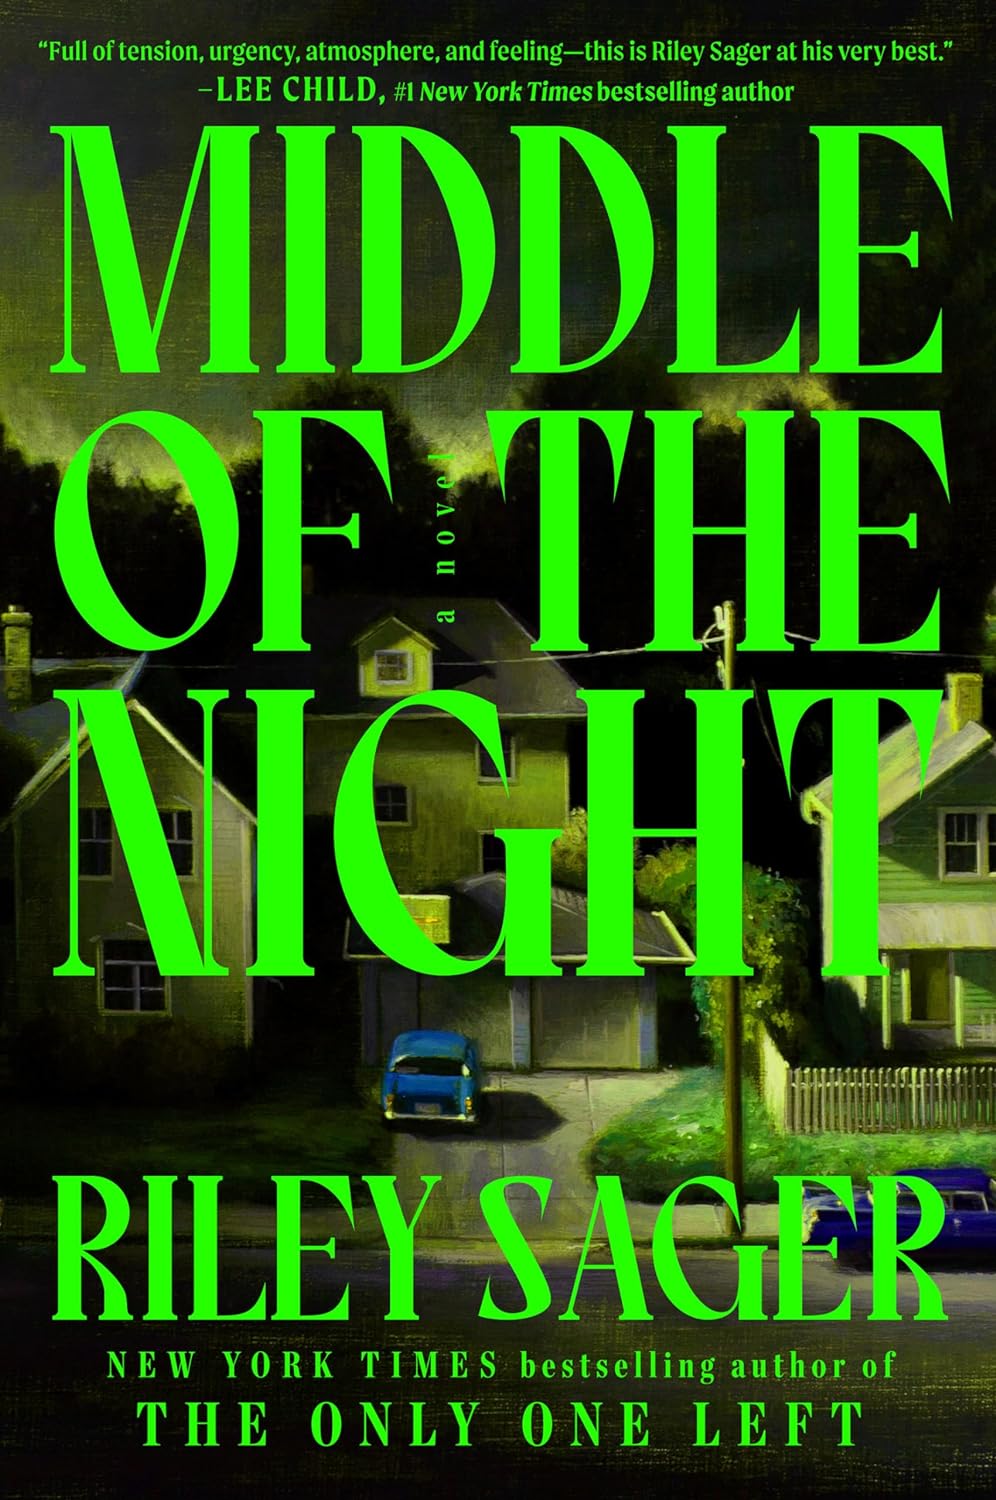 Image for "Middle of the Night"